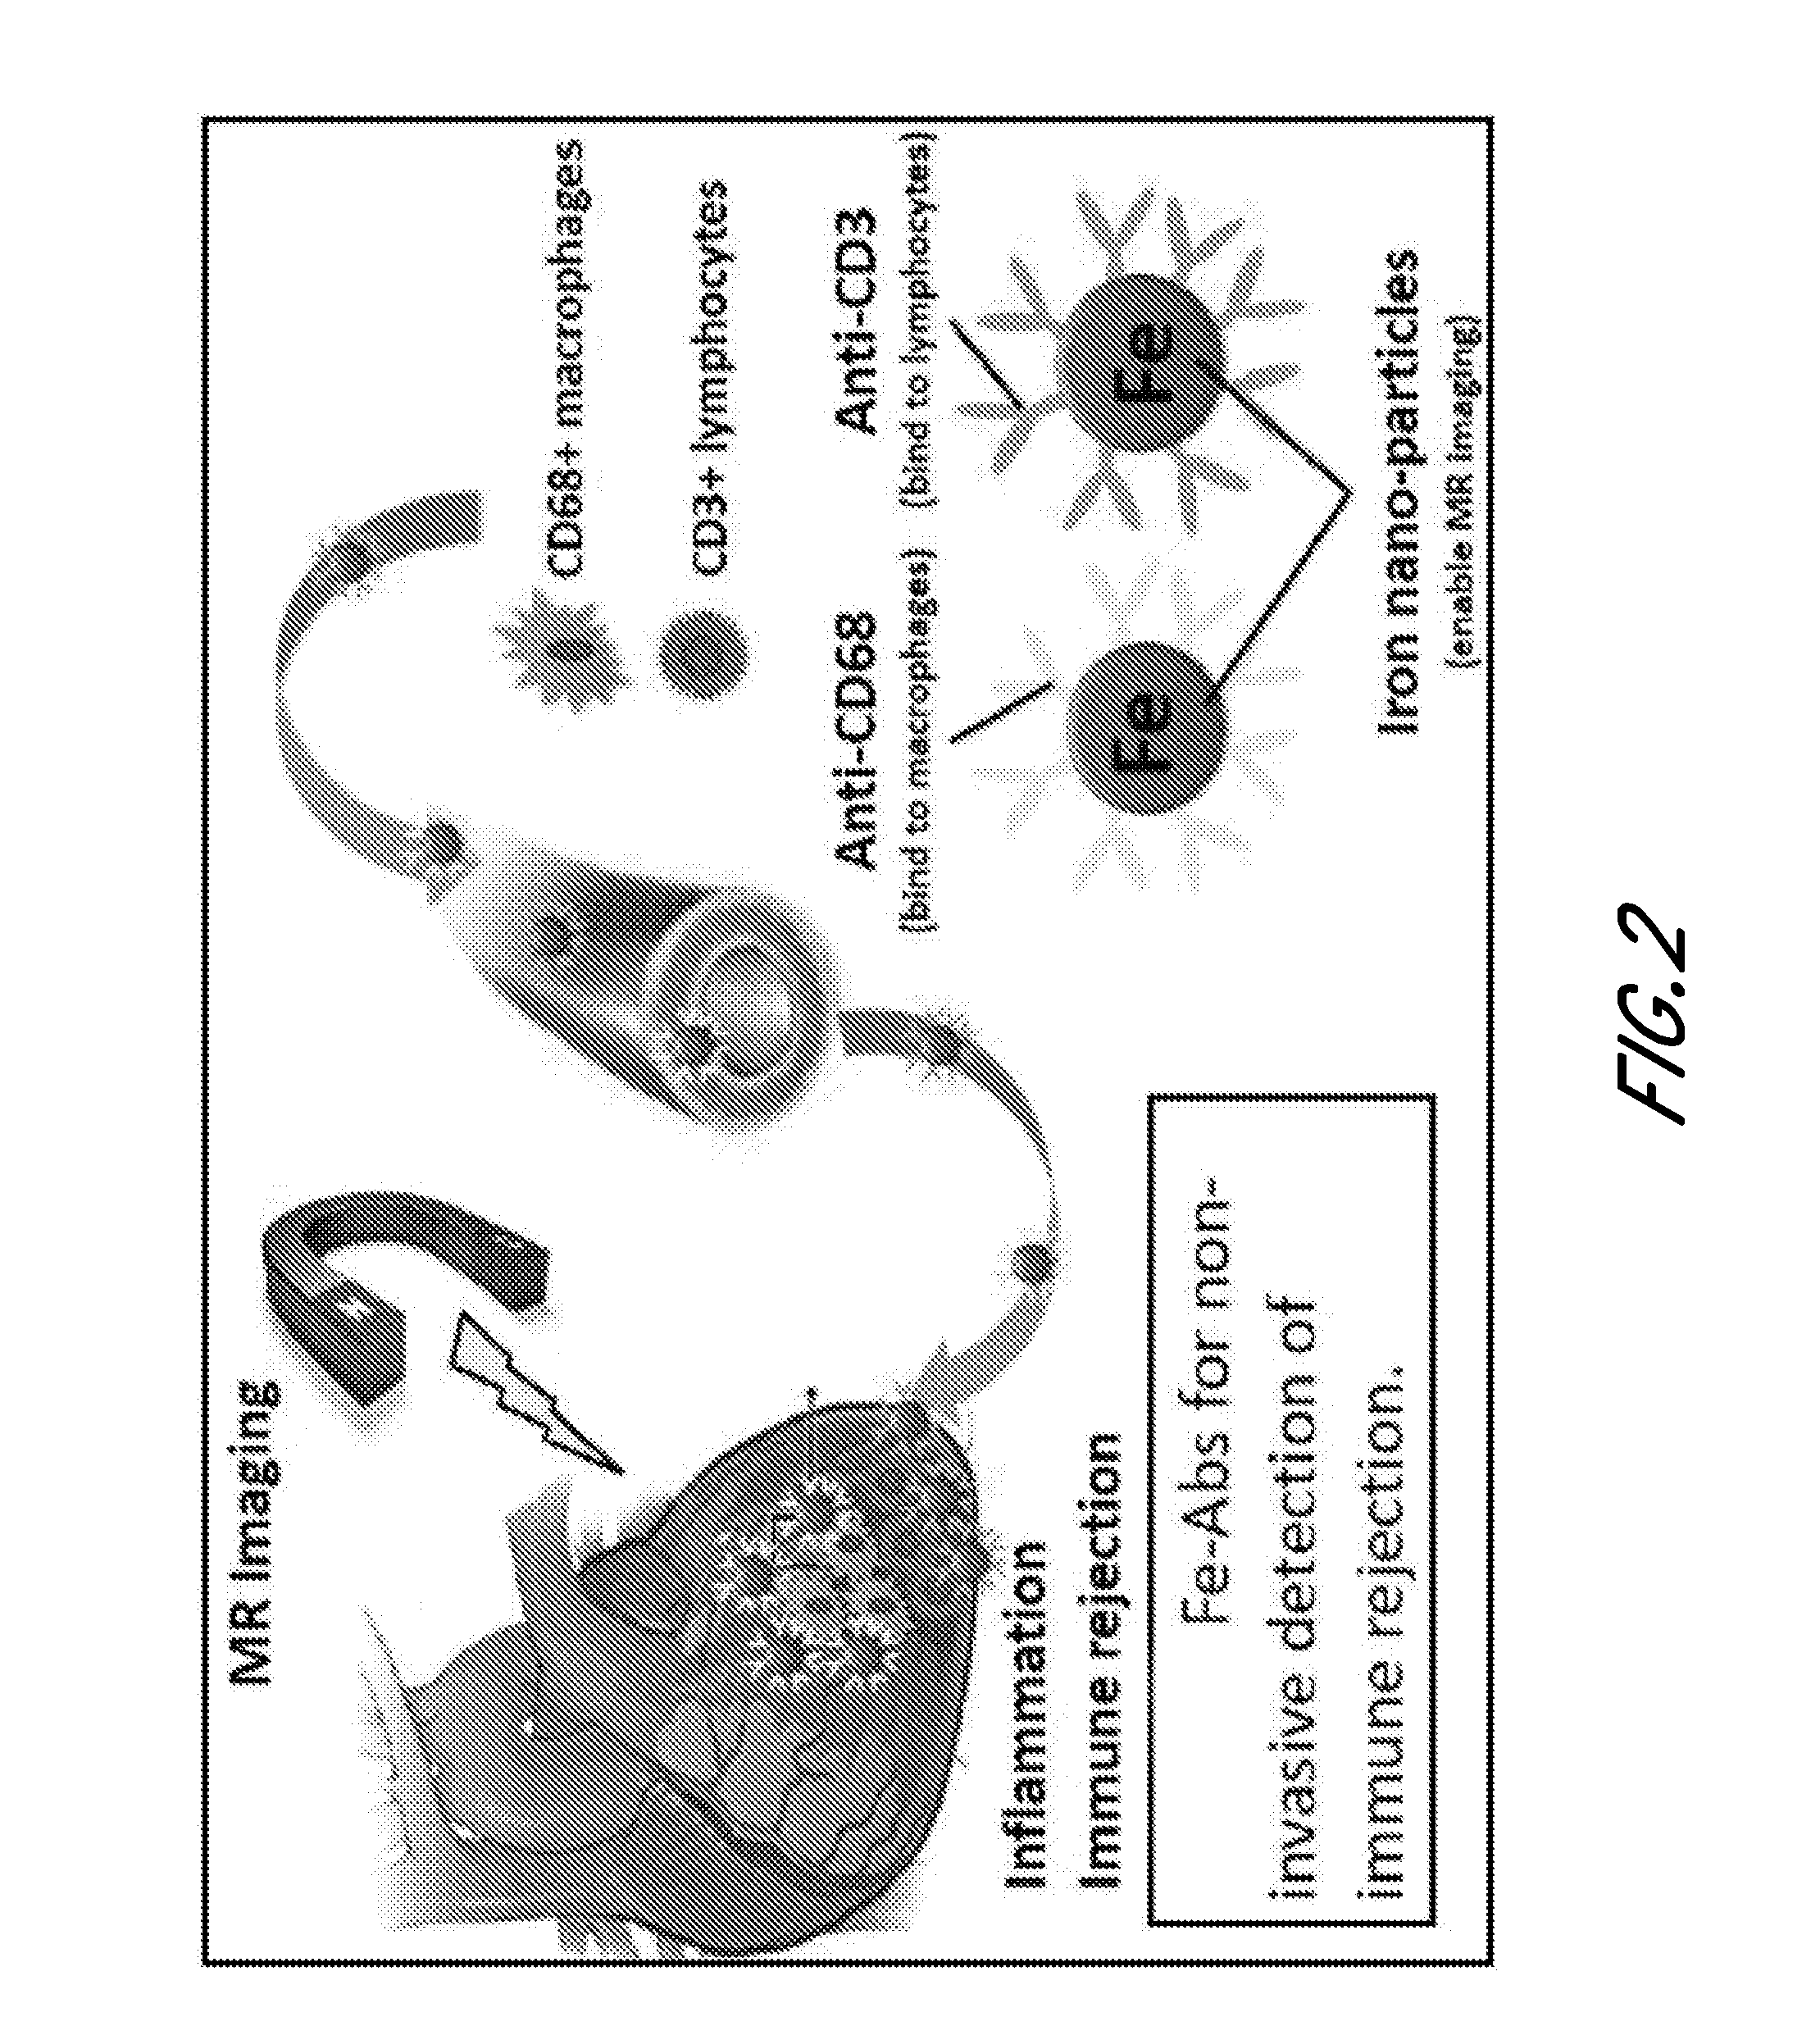 Bi-functional compositions for targeting cells to diseased tissues and methods of using same